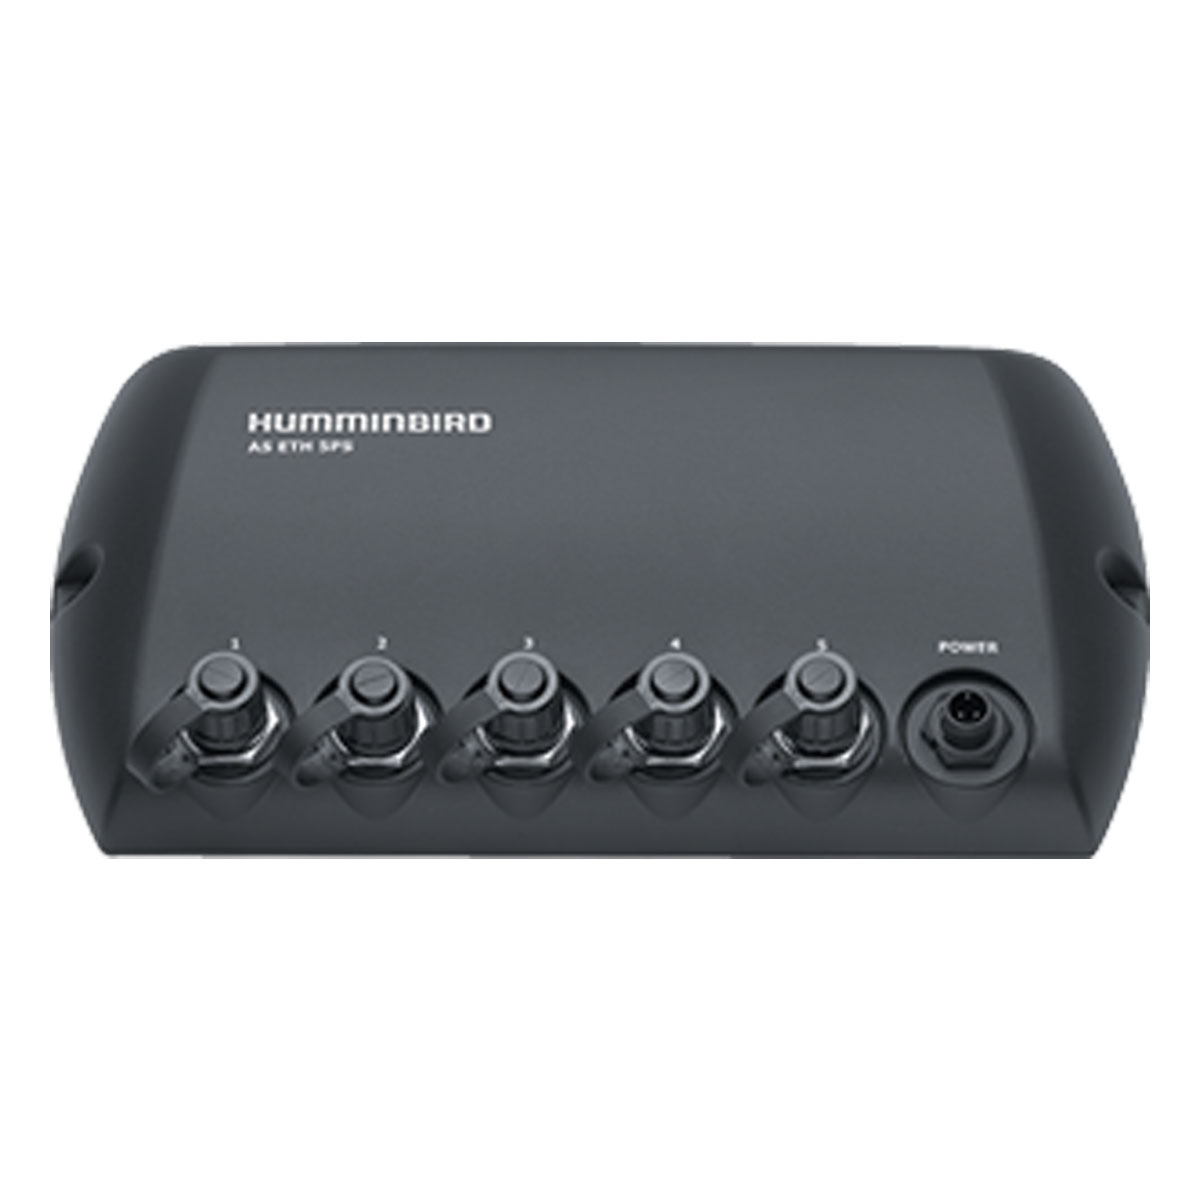 ADVANCED FISHING SYSTEM - 5 PORT ETHERNET SWITCH 